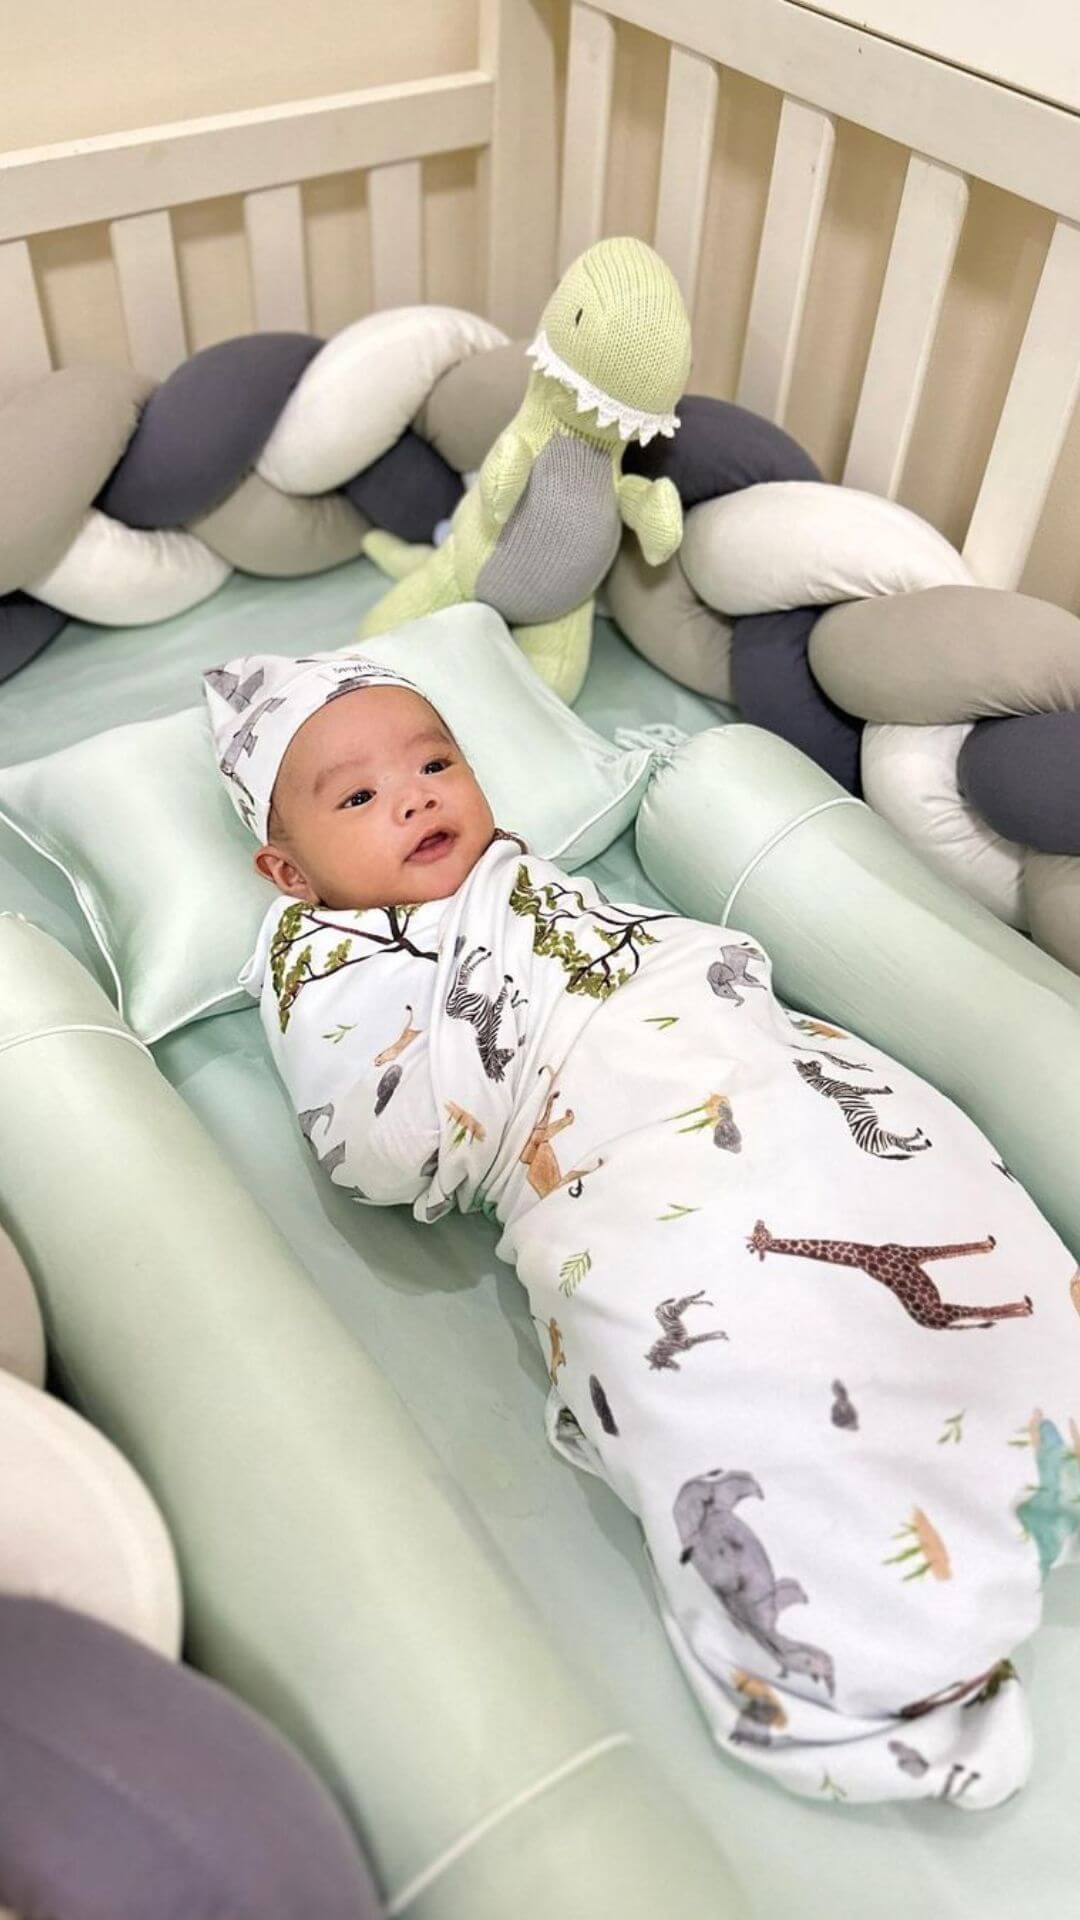 ava and ava ph review buttery breathable soft organic bamboo lyocell baby bedding set (fitted crib sheet, pillowcases, pillows, bolsters) in mint green